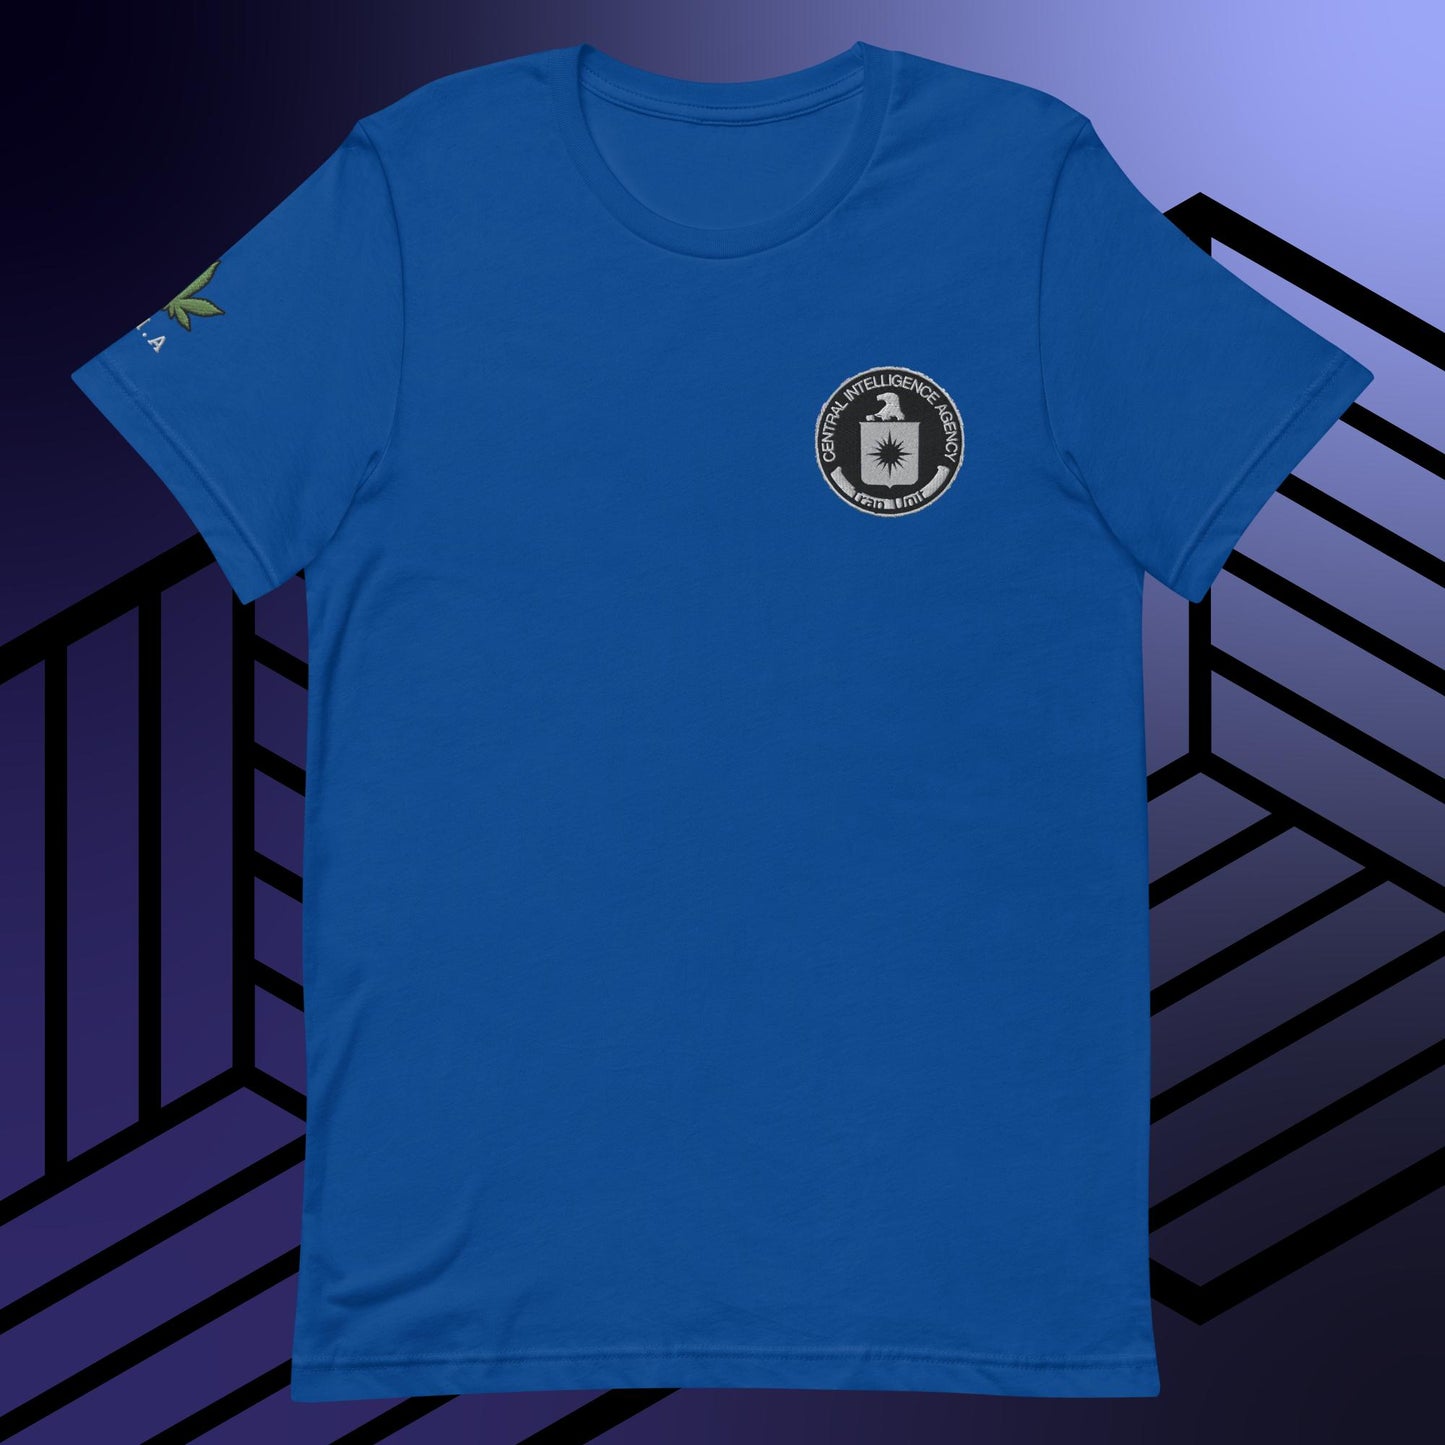 a blue t - shirt with a black and white logo